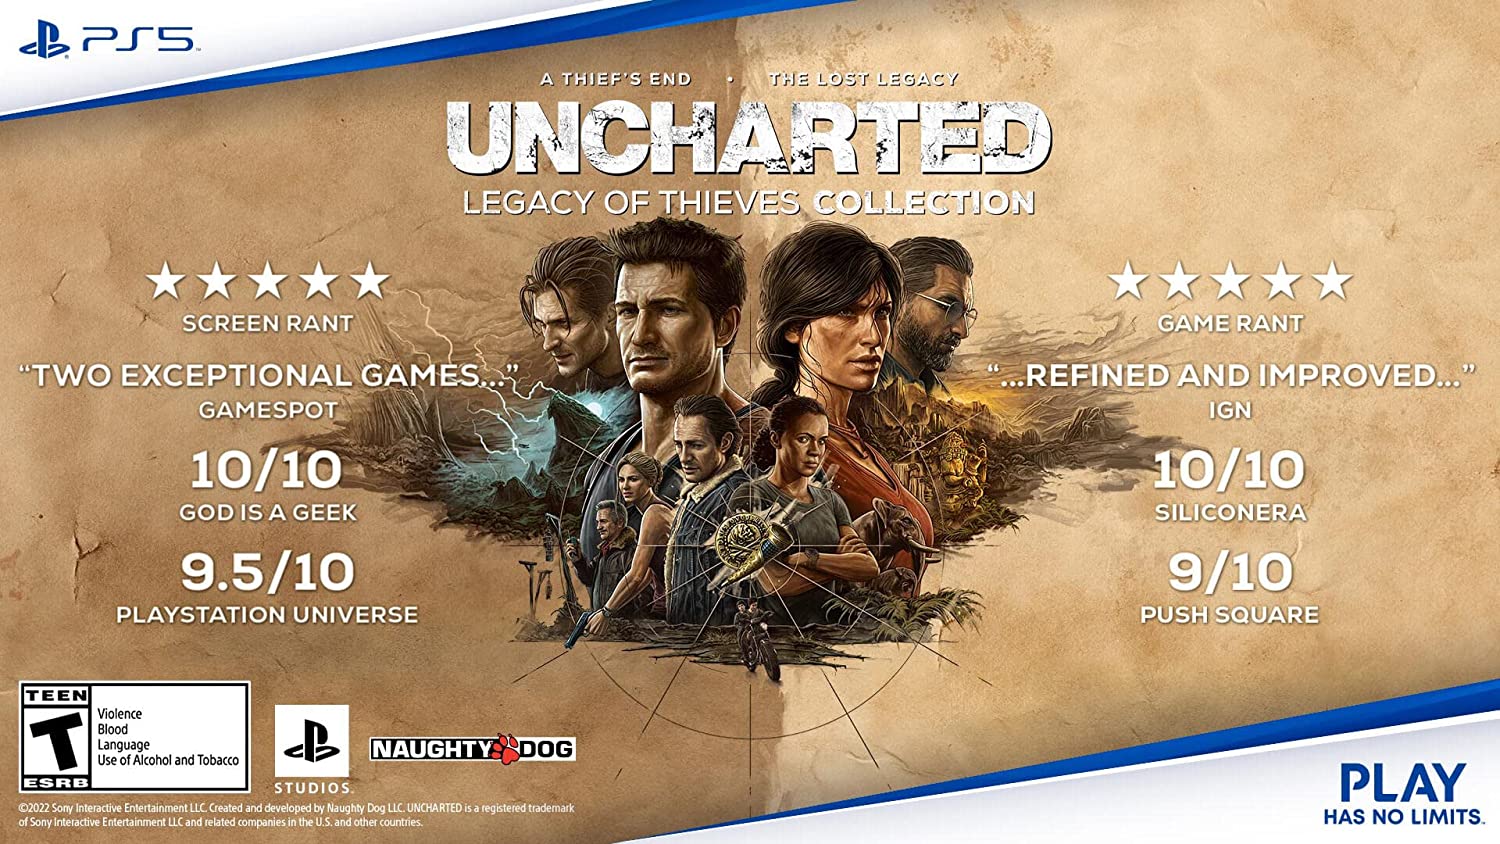 Uncharted 4 ps5. Плейстейшен 5 анчартед Легаси. Uncharted collection ps5. Uncharted: Legacy of Thieves collection.